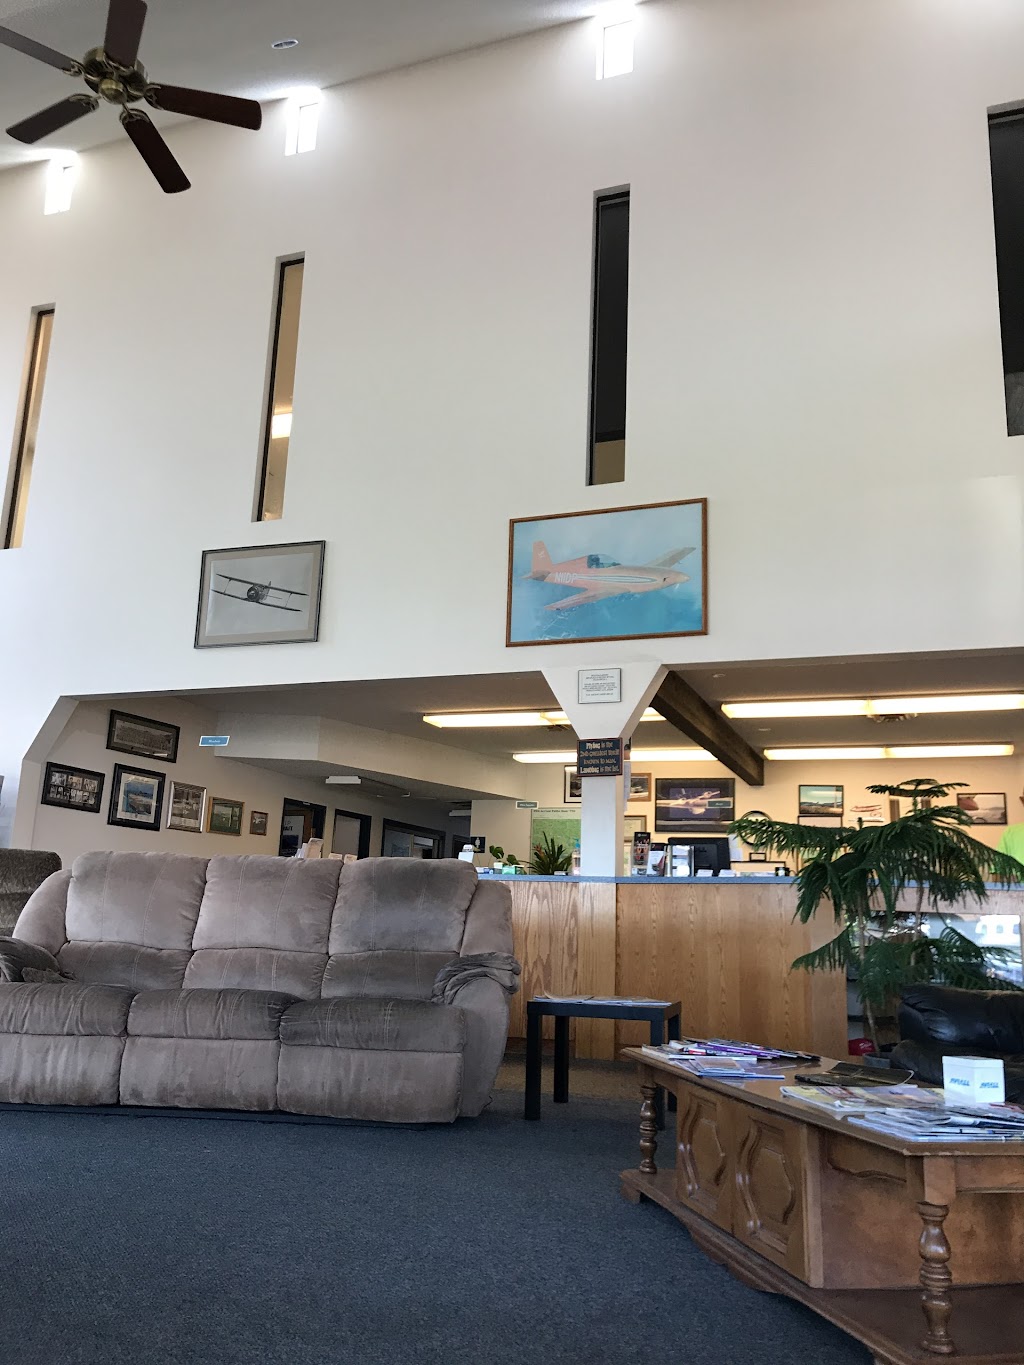 Gorge Winds Aviation Inc | 920 NW Perimeter Way, Troutdale, OR 97060, USA | Phone: (503) 661-1044